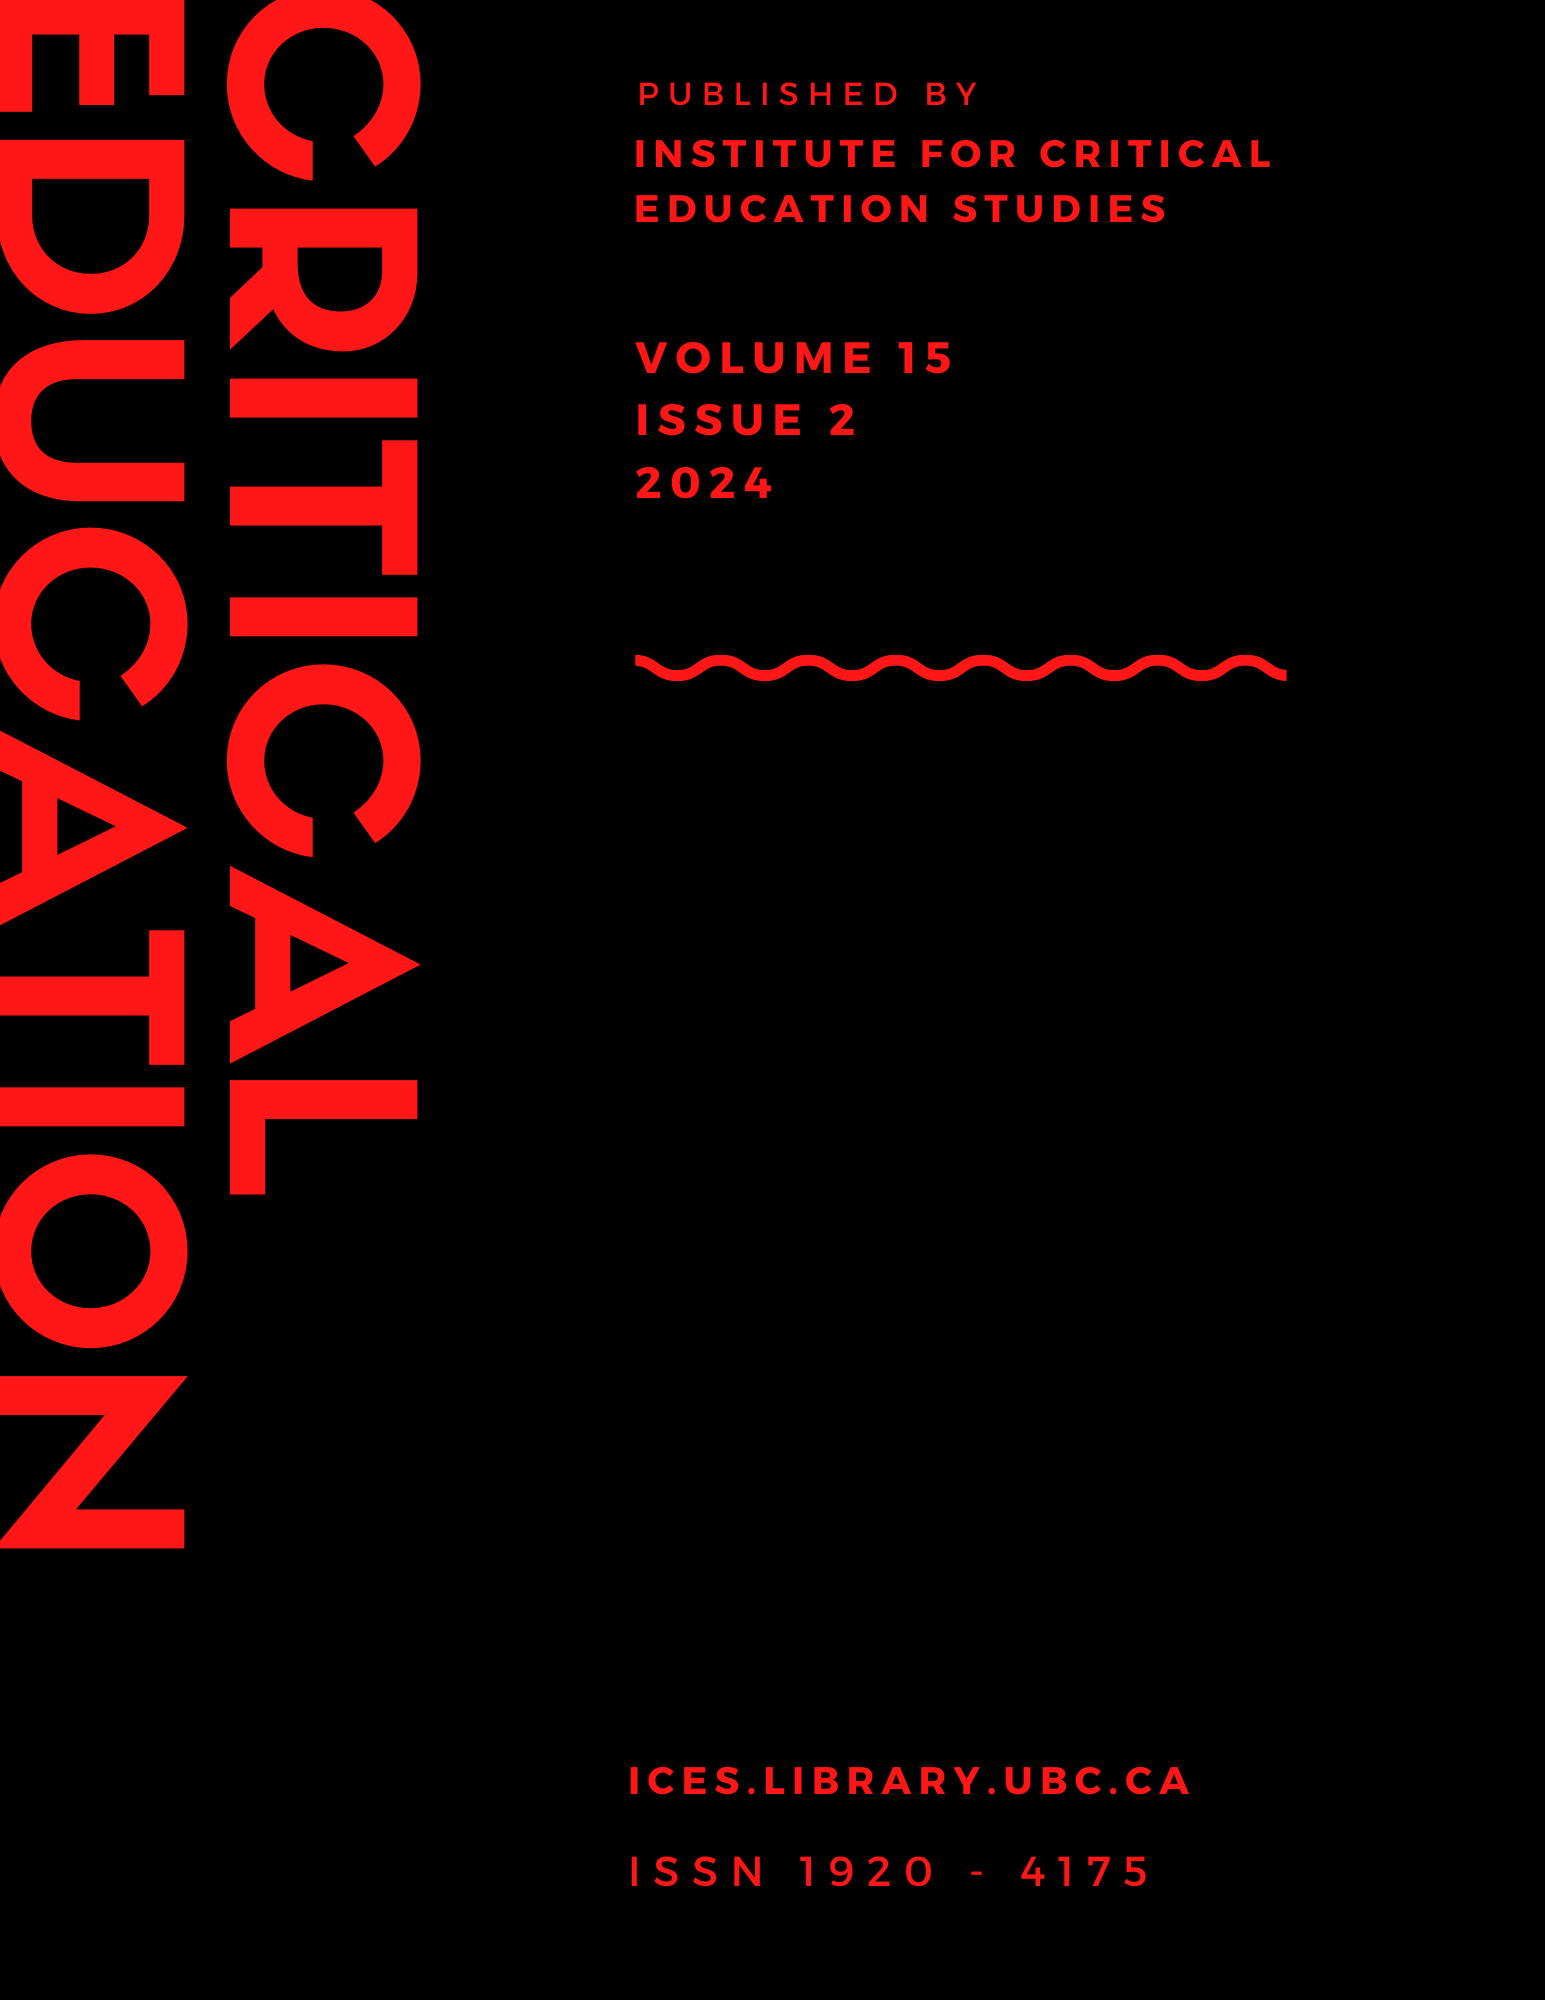 Issue cover. Critical Education Volume 15 Number 2 ISBN 1920 4175